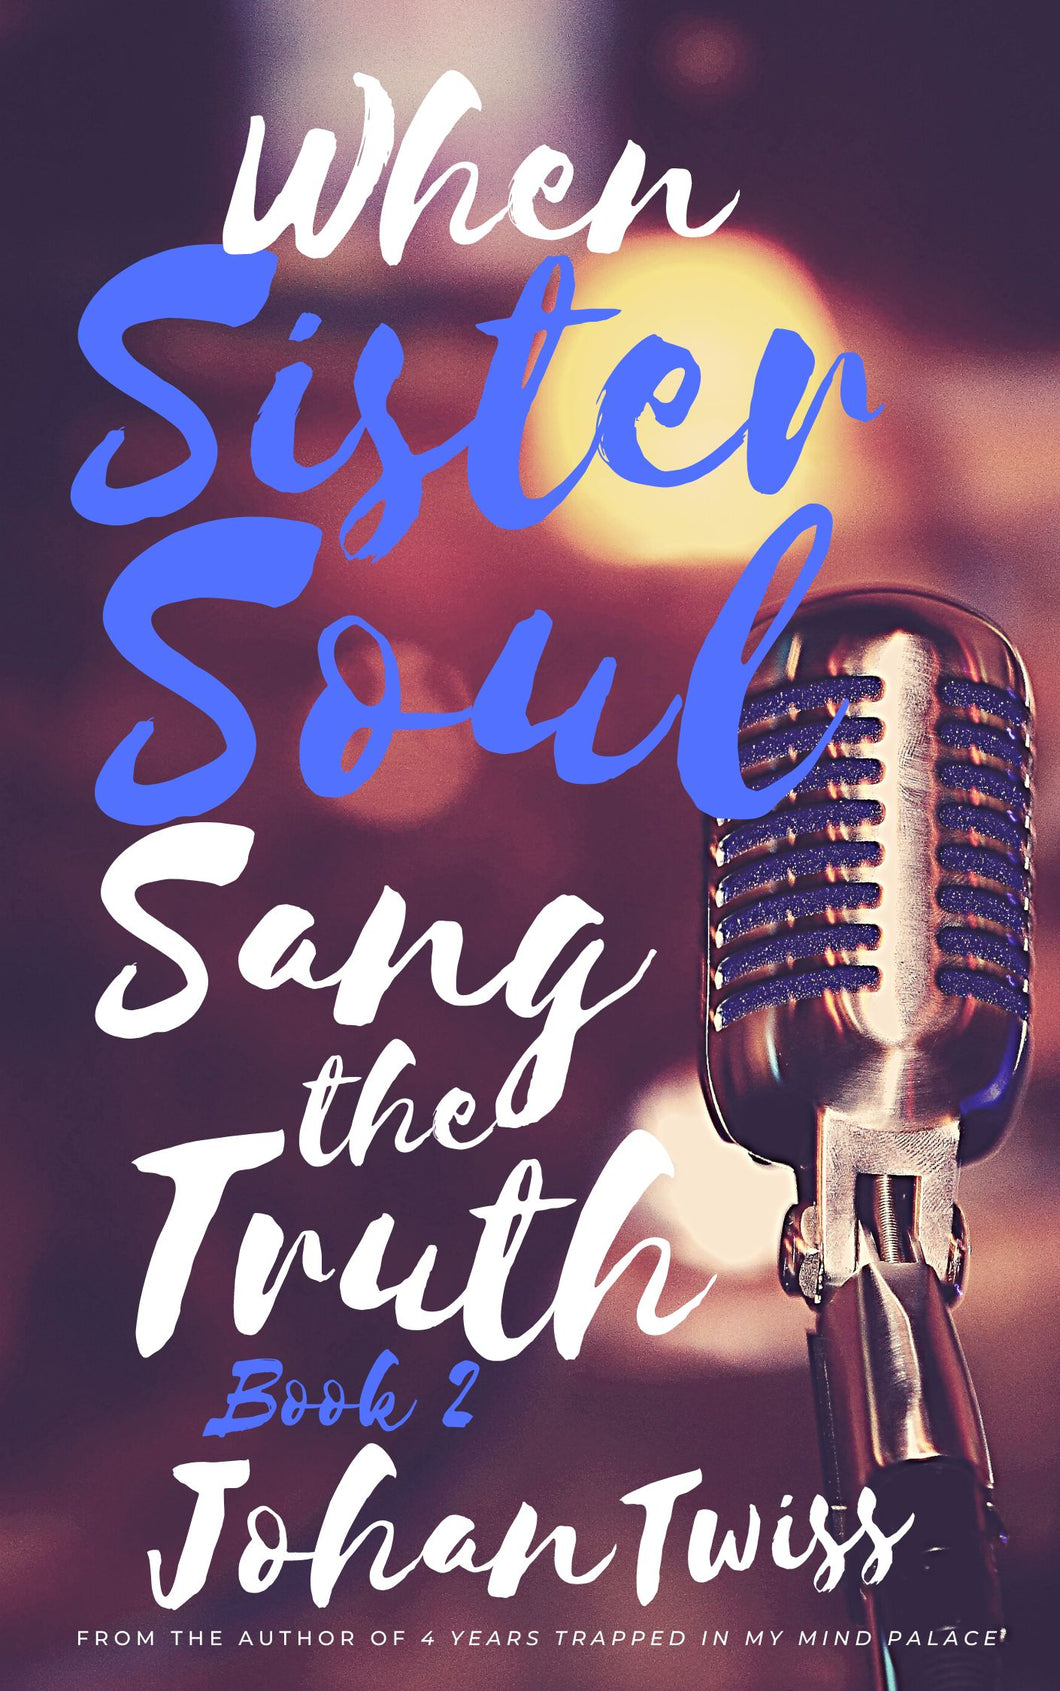 When Sister Soul Sang the Truth - Book 2 (Signed Paperback)